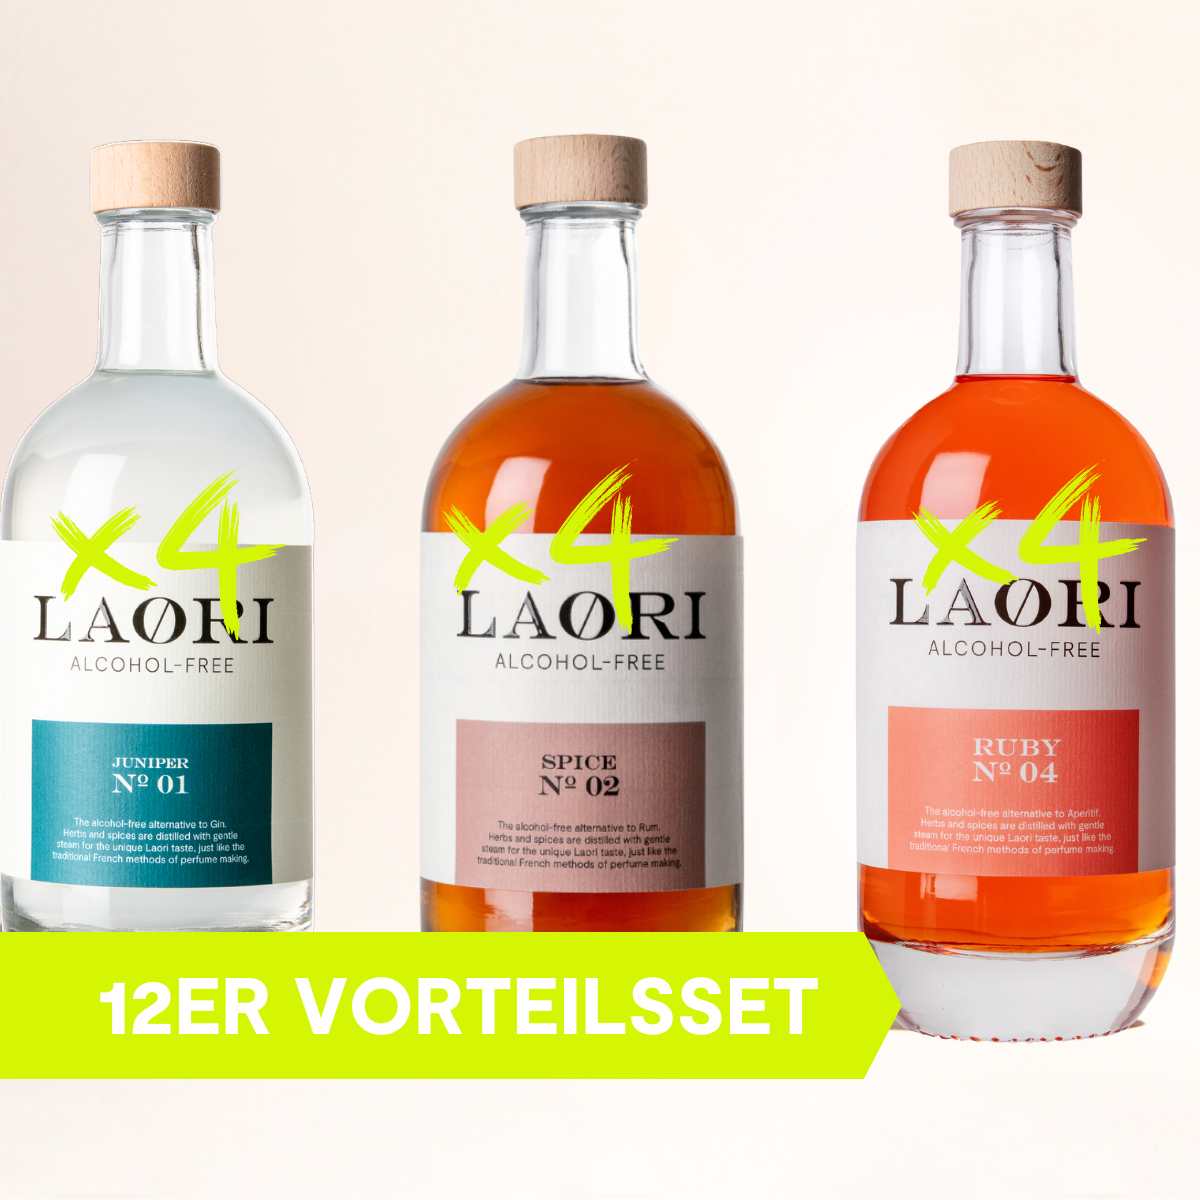 Have it all (0.5L) - Value set